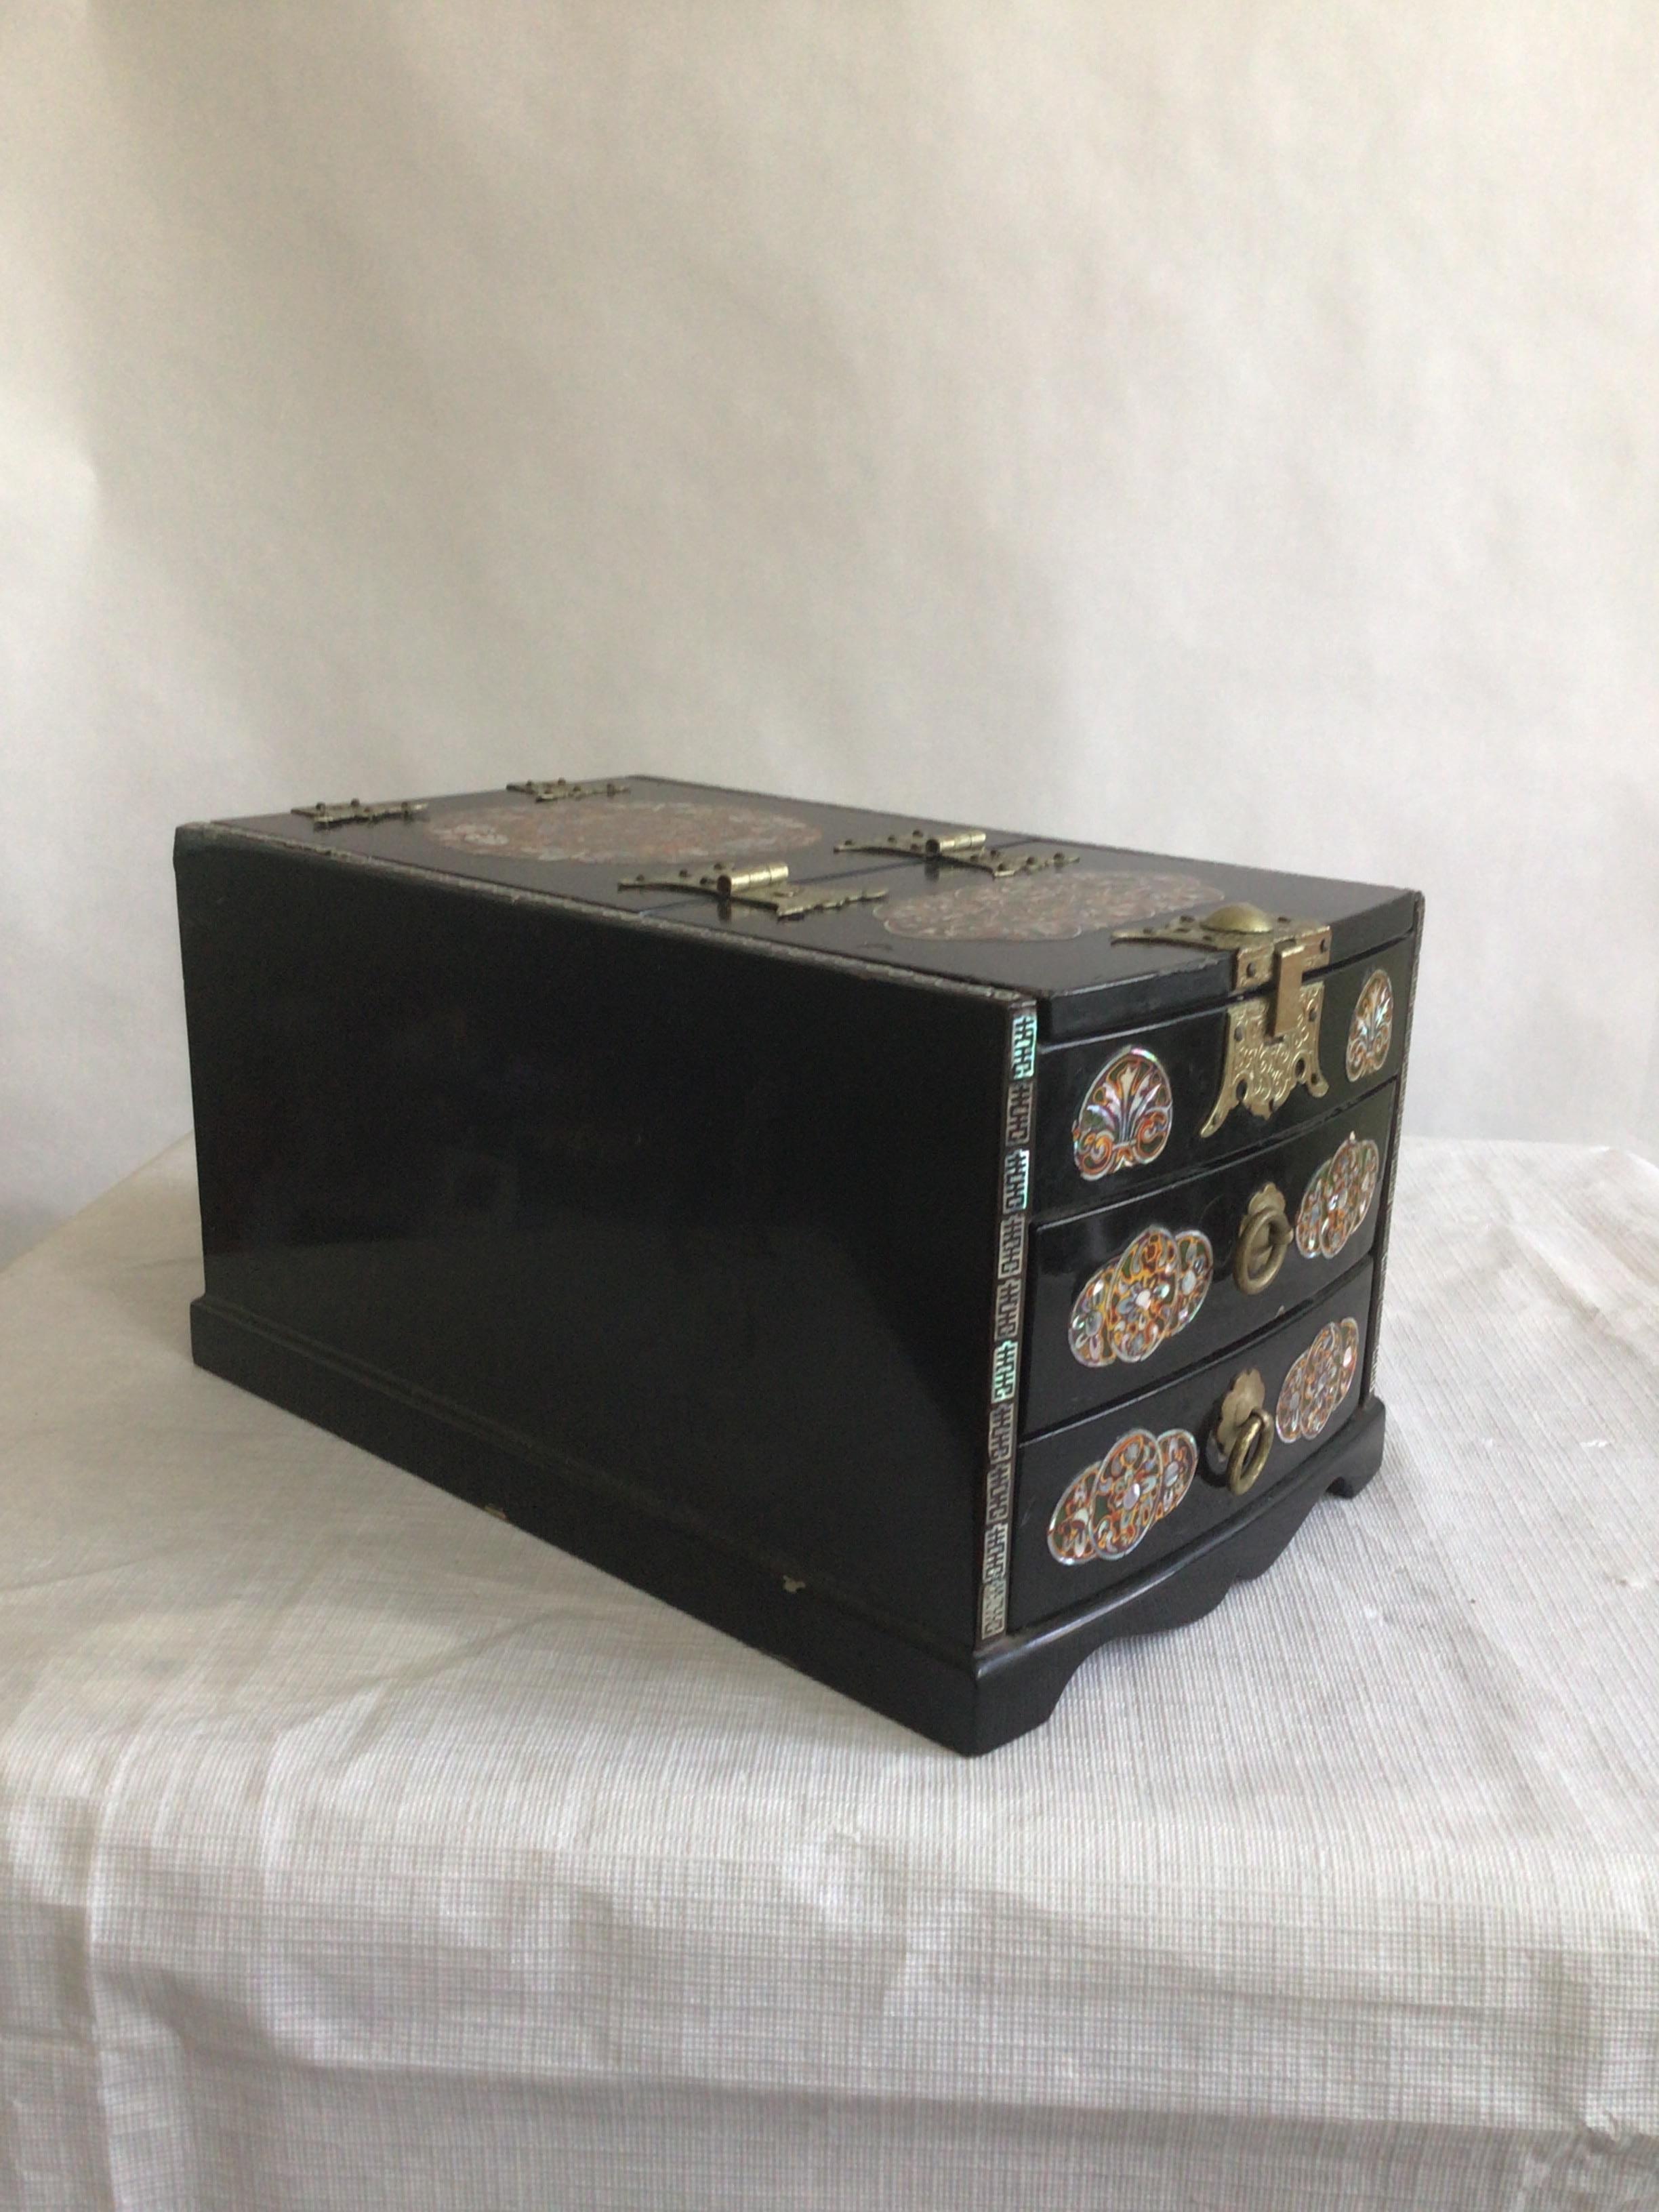 1950s Black Lacquered Wood and Mother Of Pearl Inlayed Small Dressing Box
Two Felt Lined Drawers
Mirror on underside of lid
Small knick on top
